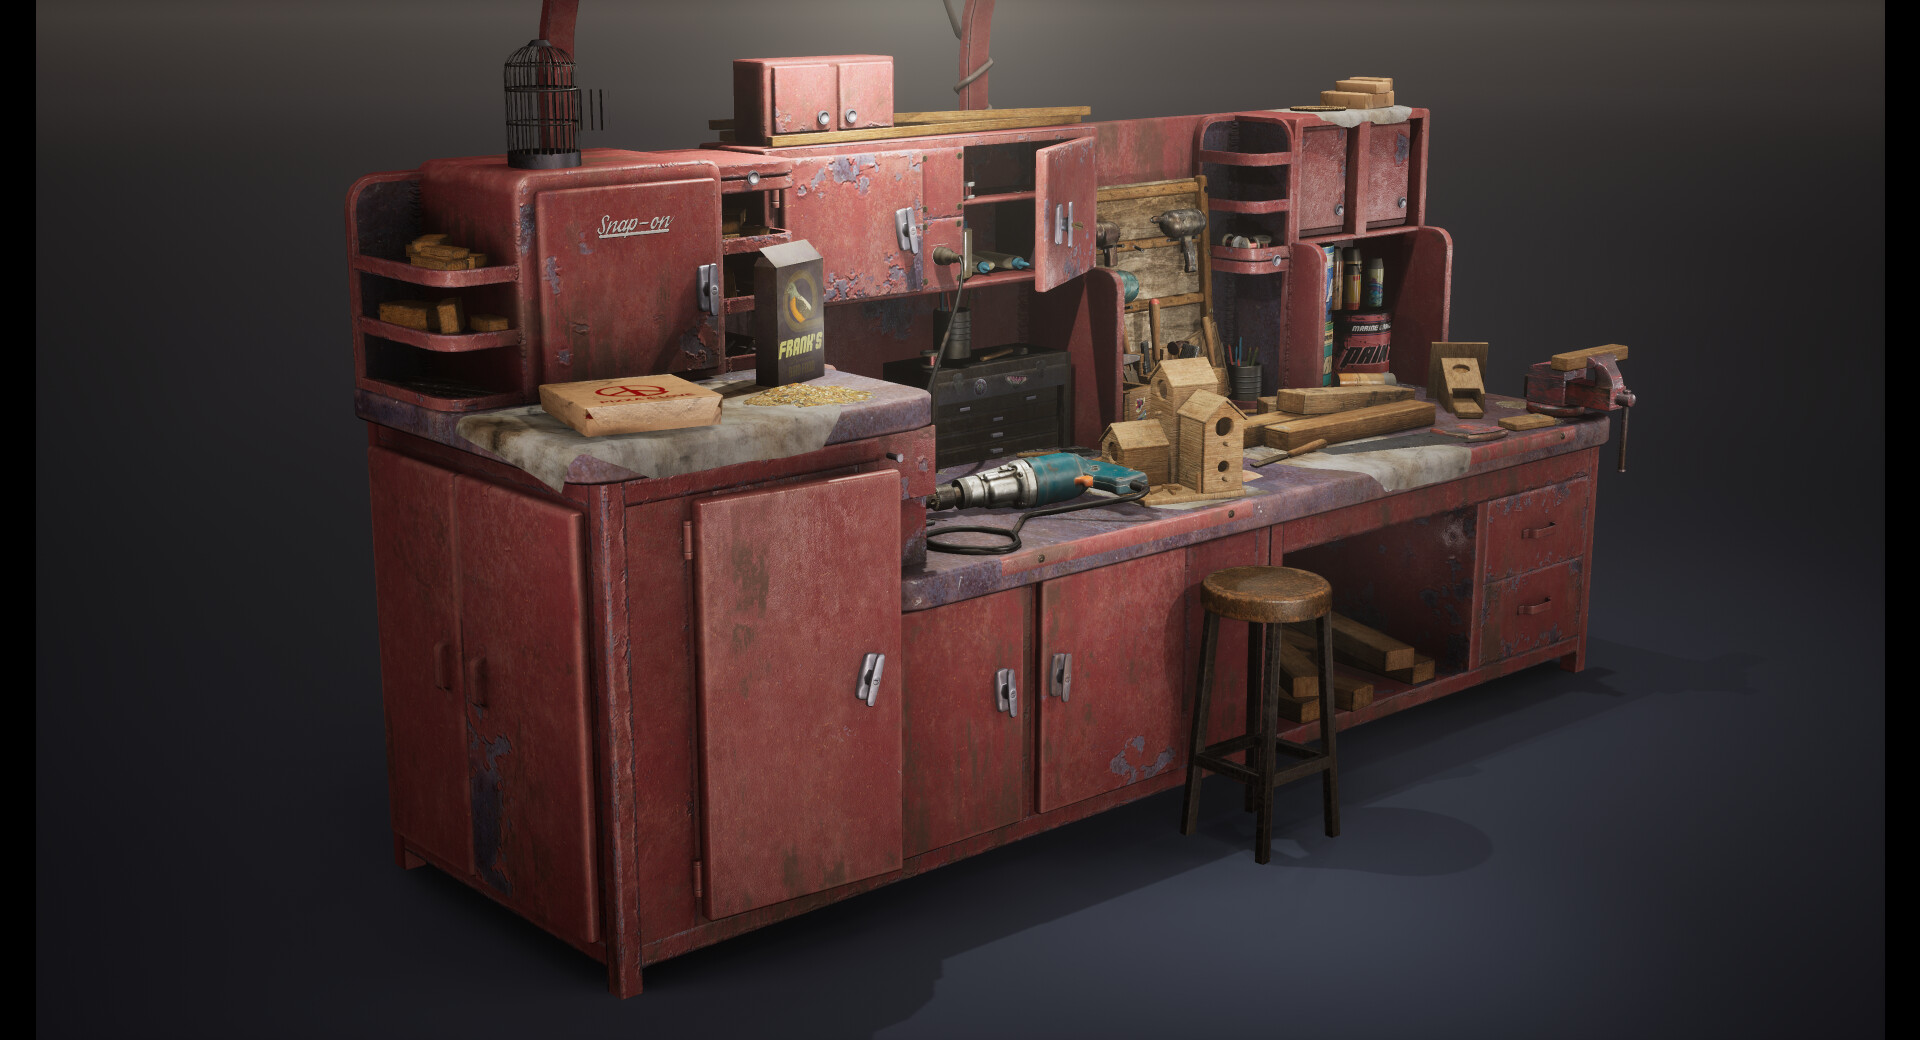 Workbench level 1 required rust как фото 59